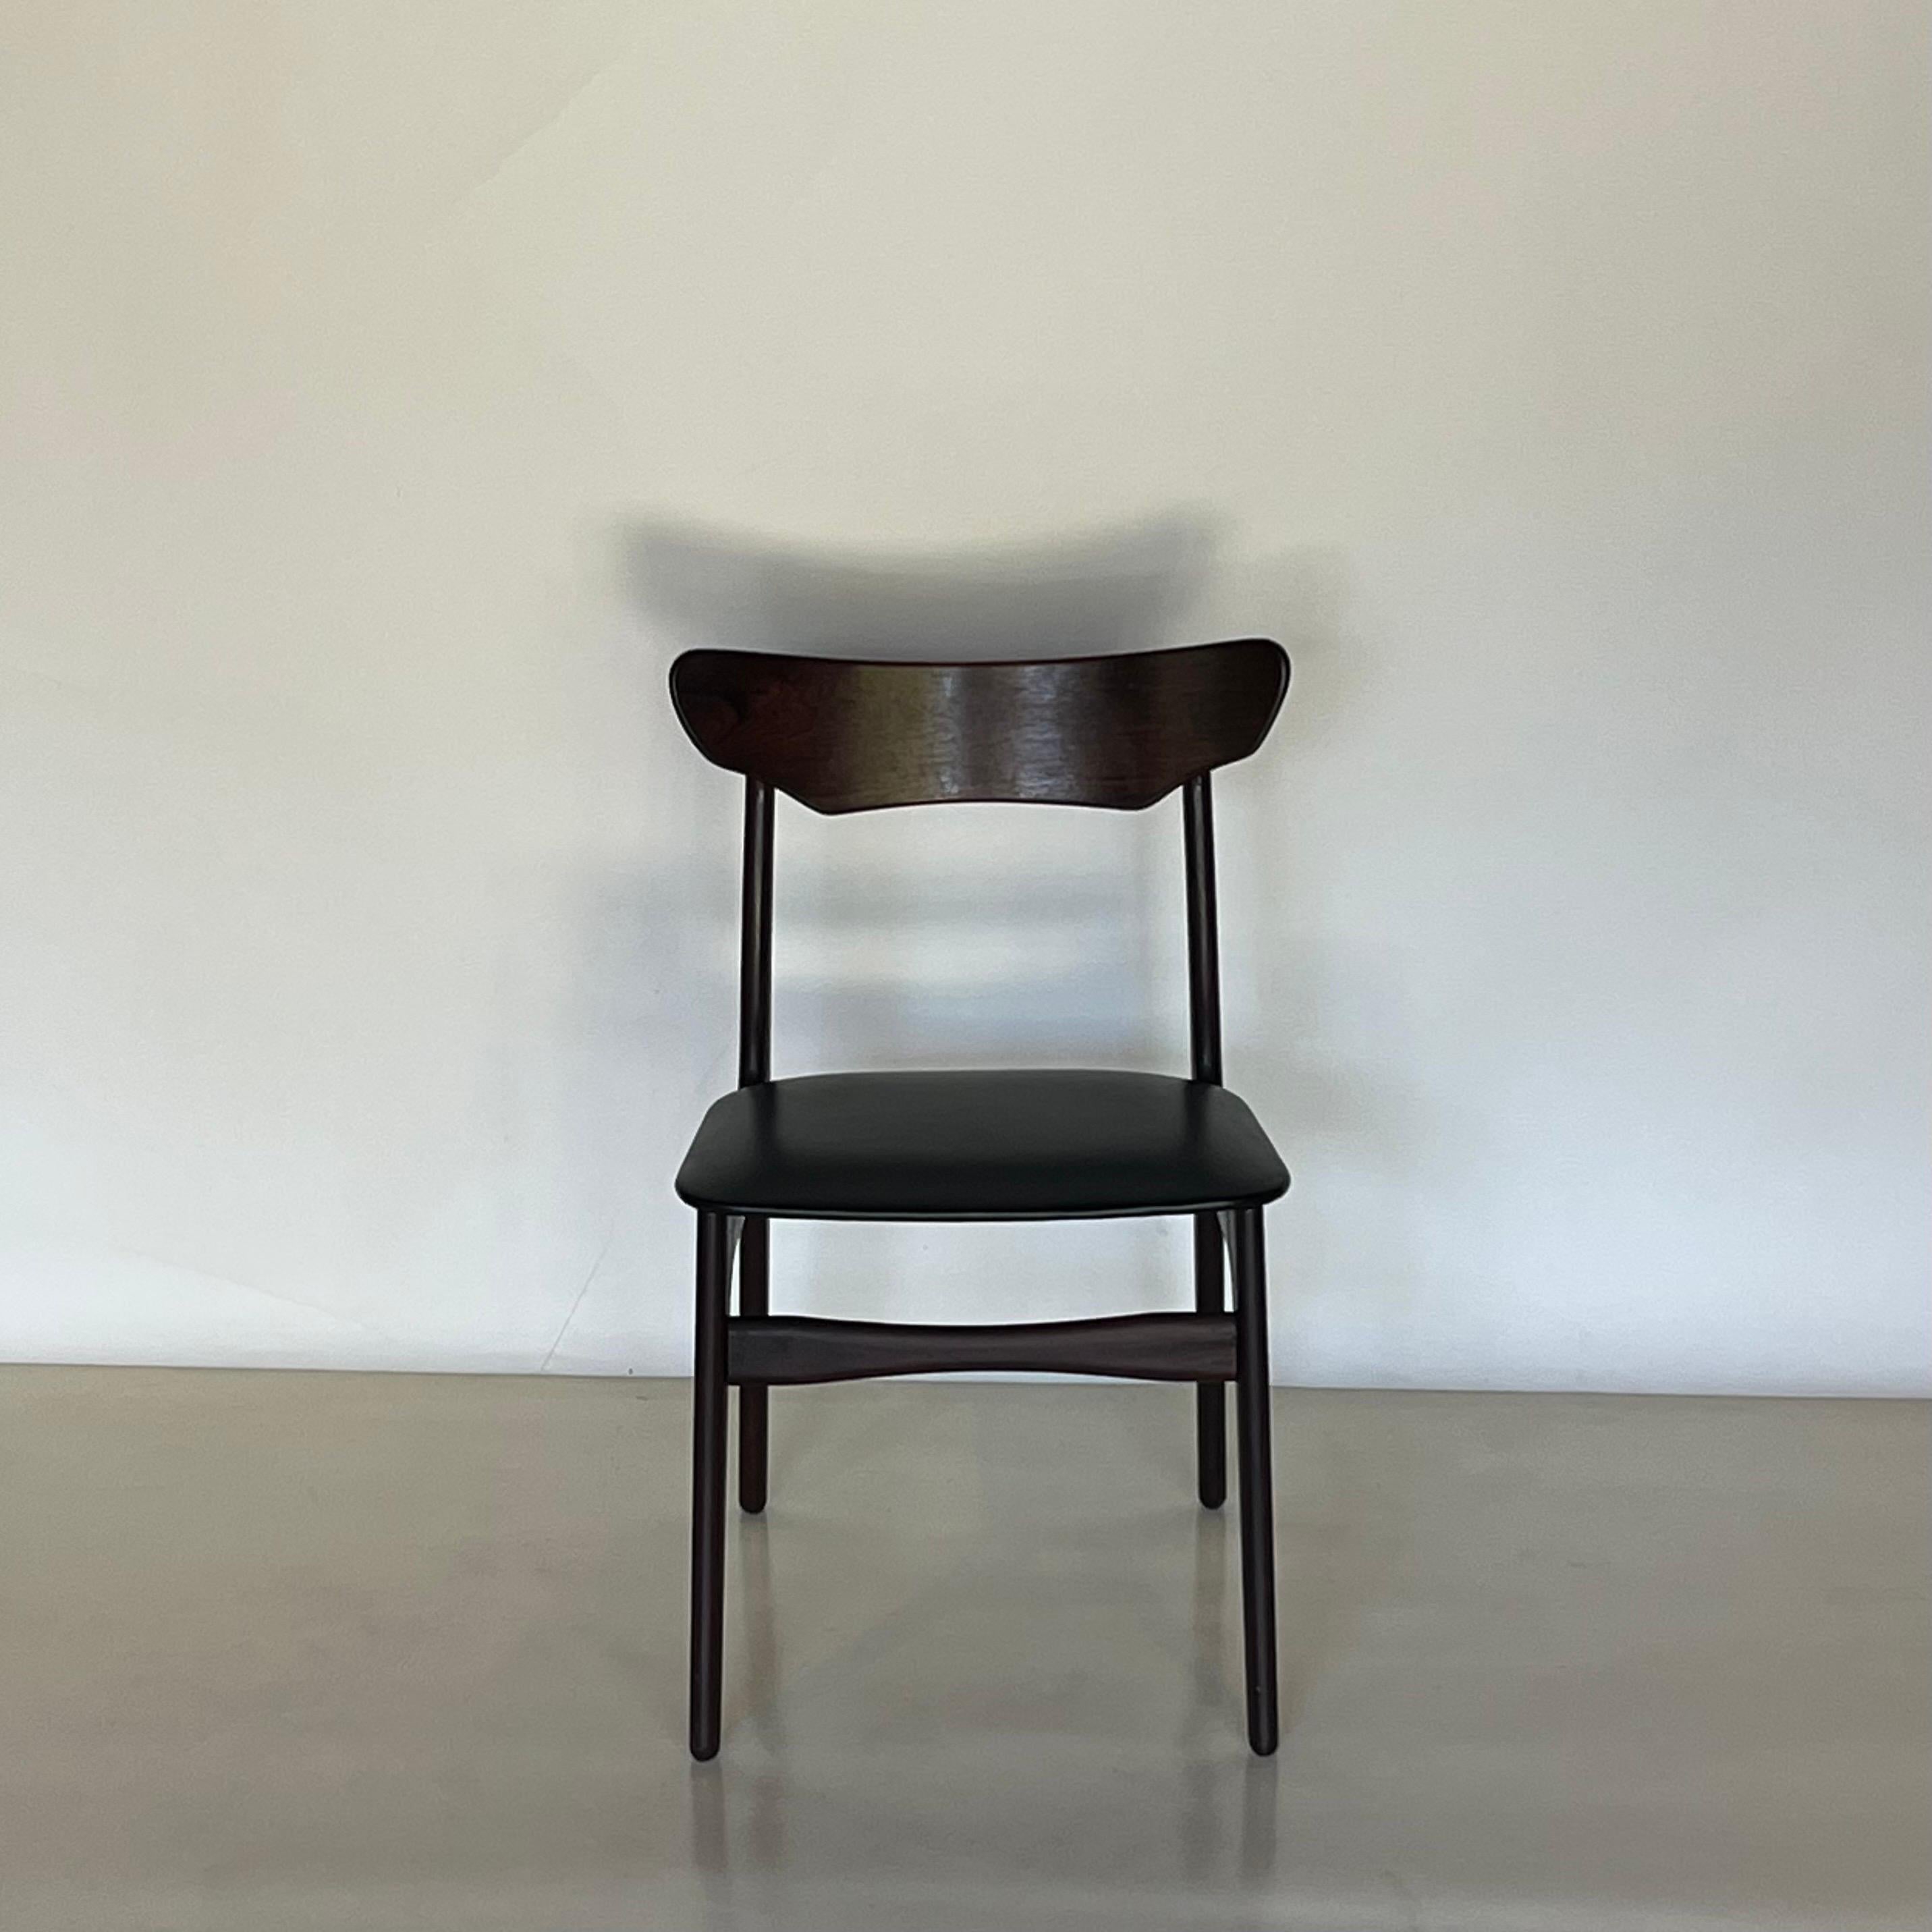 Rare rosewood chair by Schiønning & Elgaard. Made by Randers Møbelfabrik in Denmark.

Chic and understated.